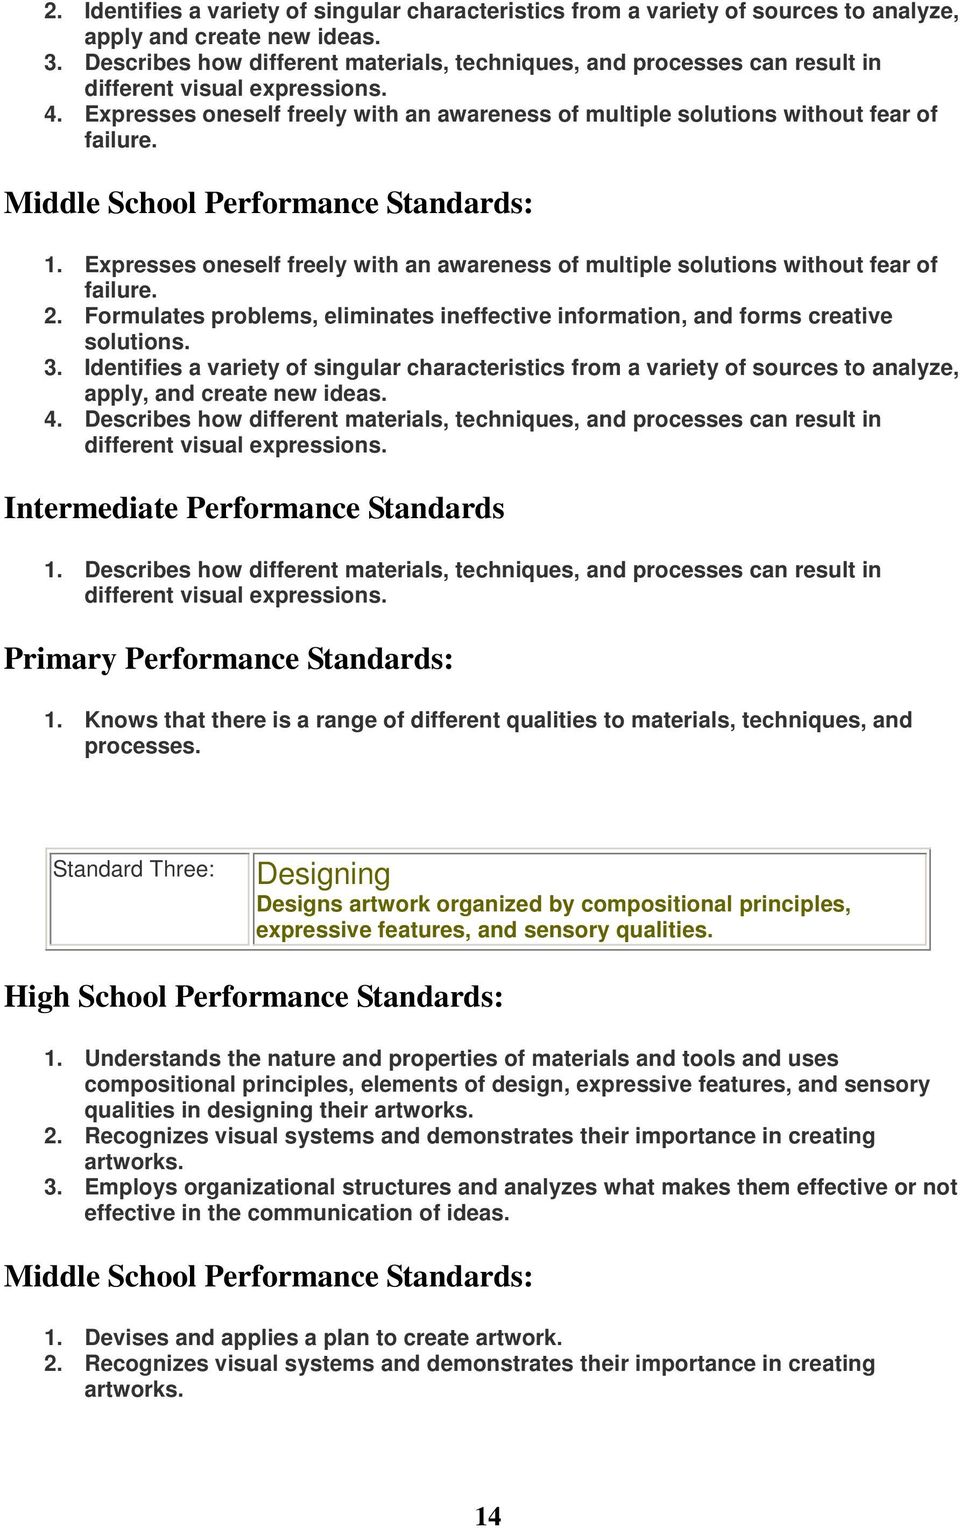 Middle School Performance Standards: 1. Expresses oneself freely with an awareness of multiple solutions without fear of failure. 2.